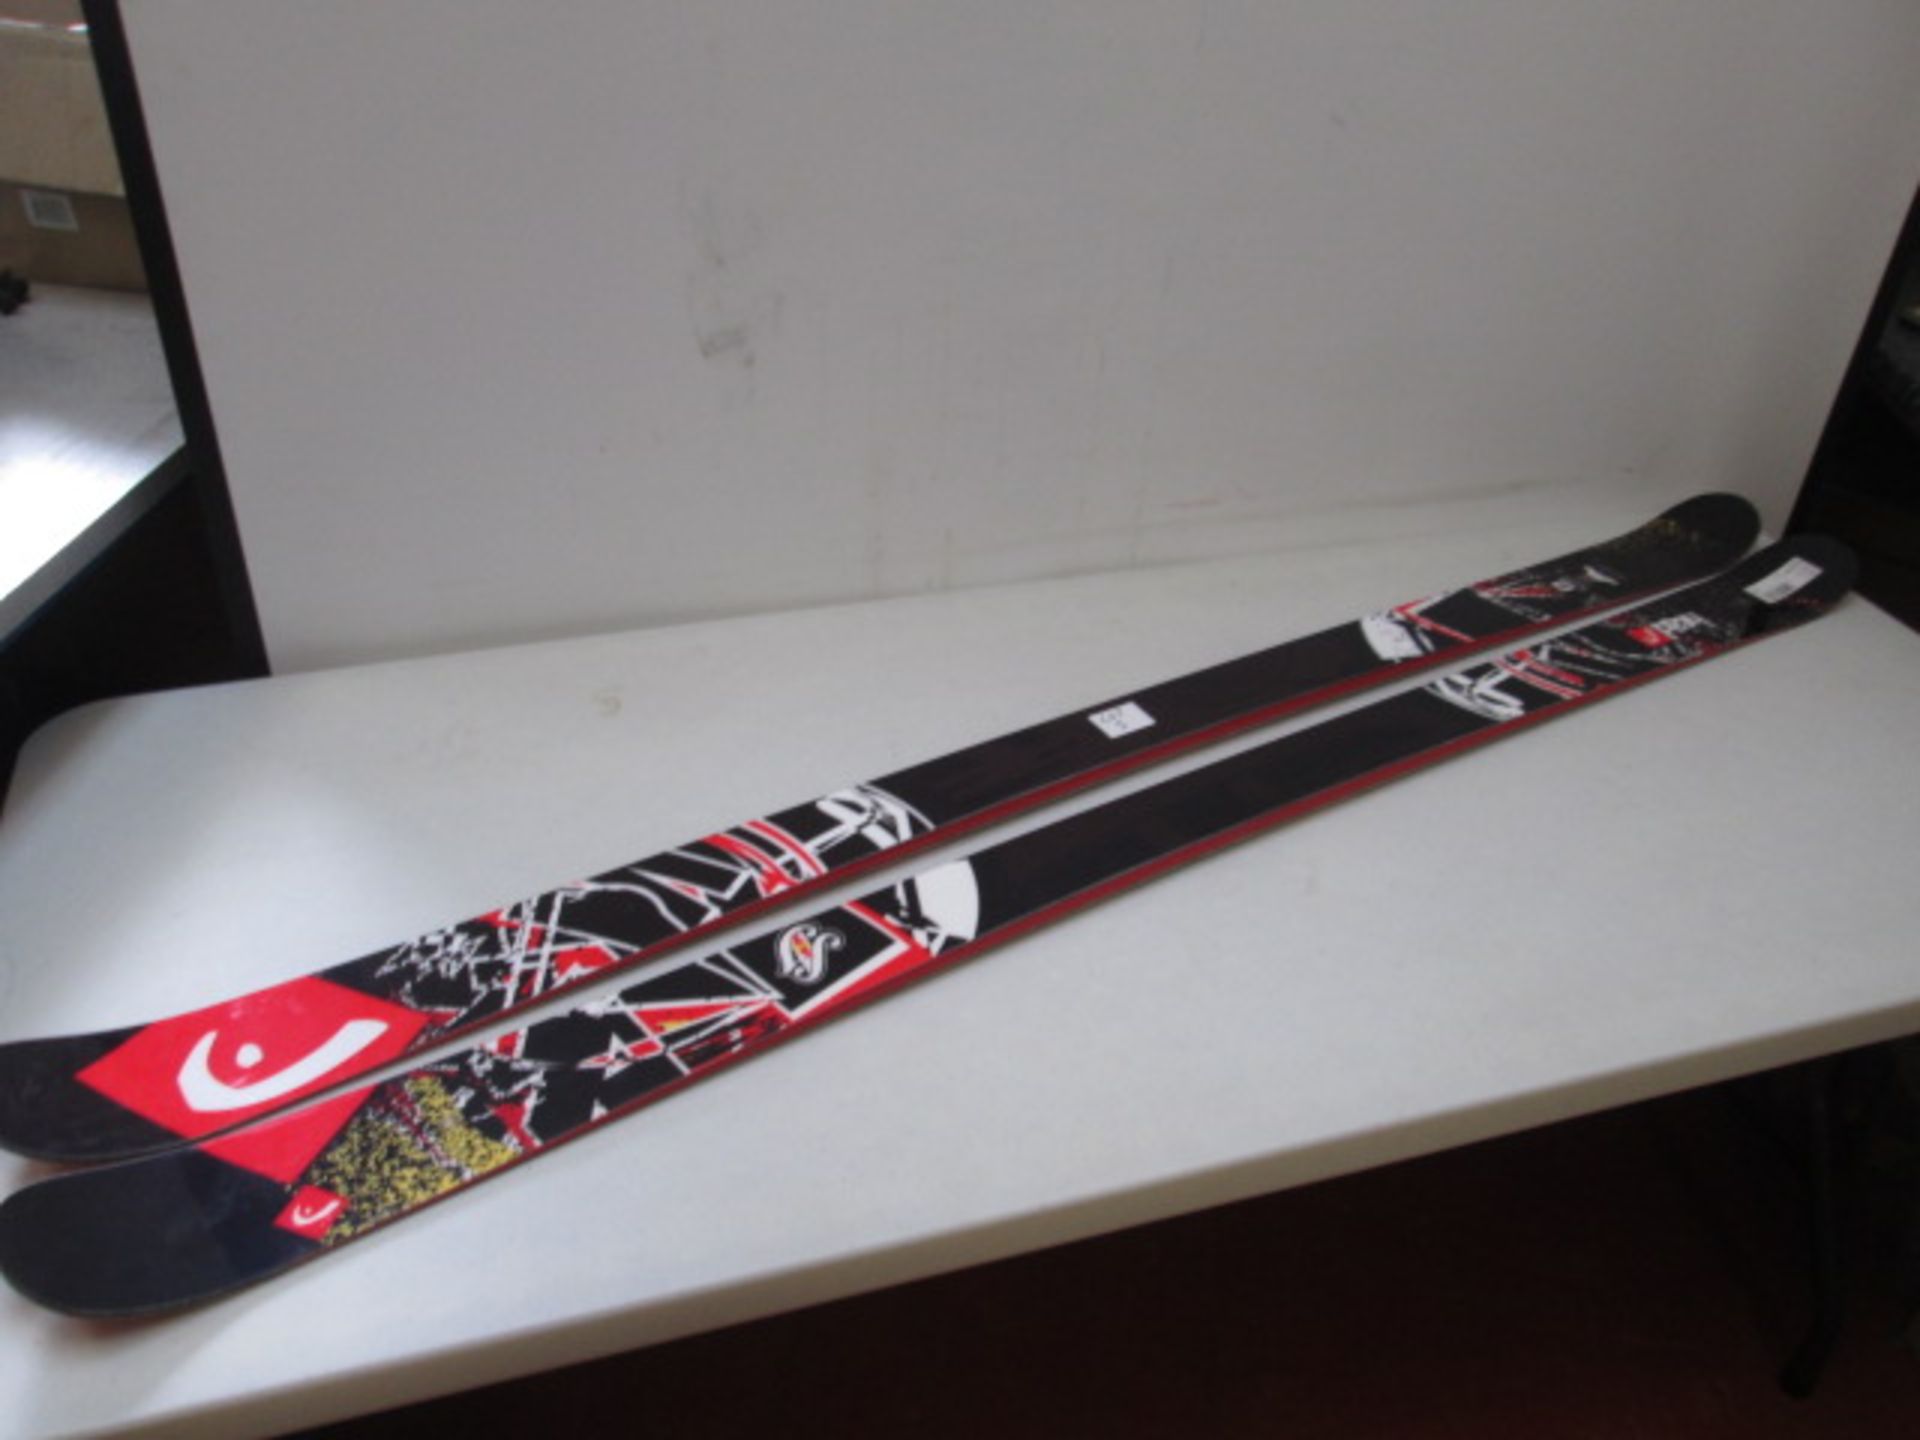 Head 'The Caddy' Park & Pipe 1.8m Skis. RRP £225.00